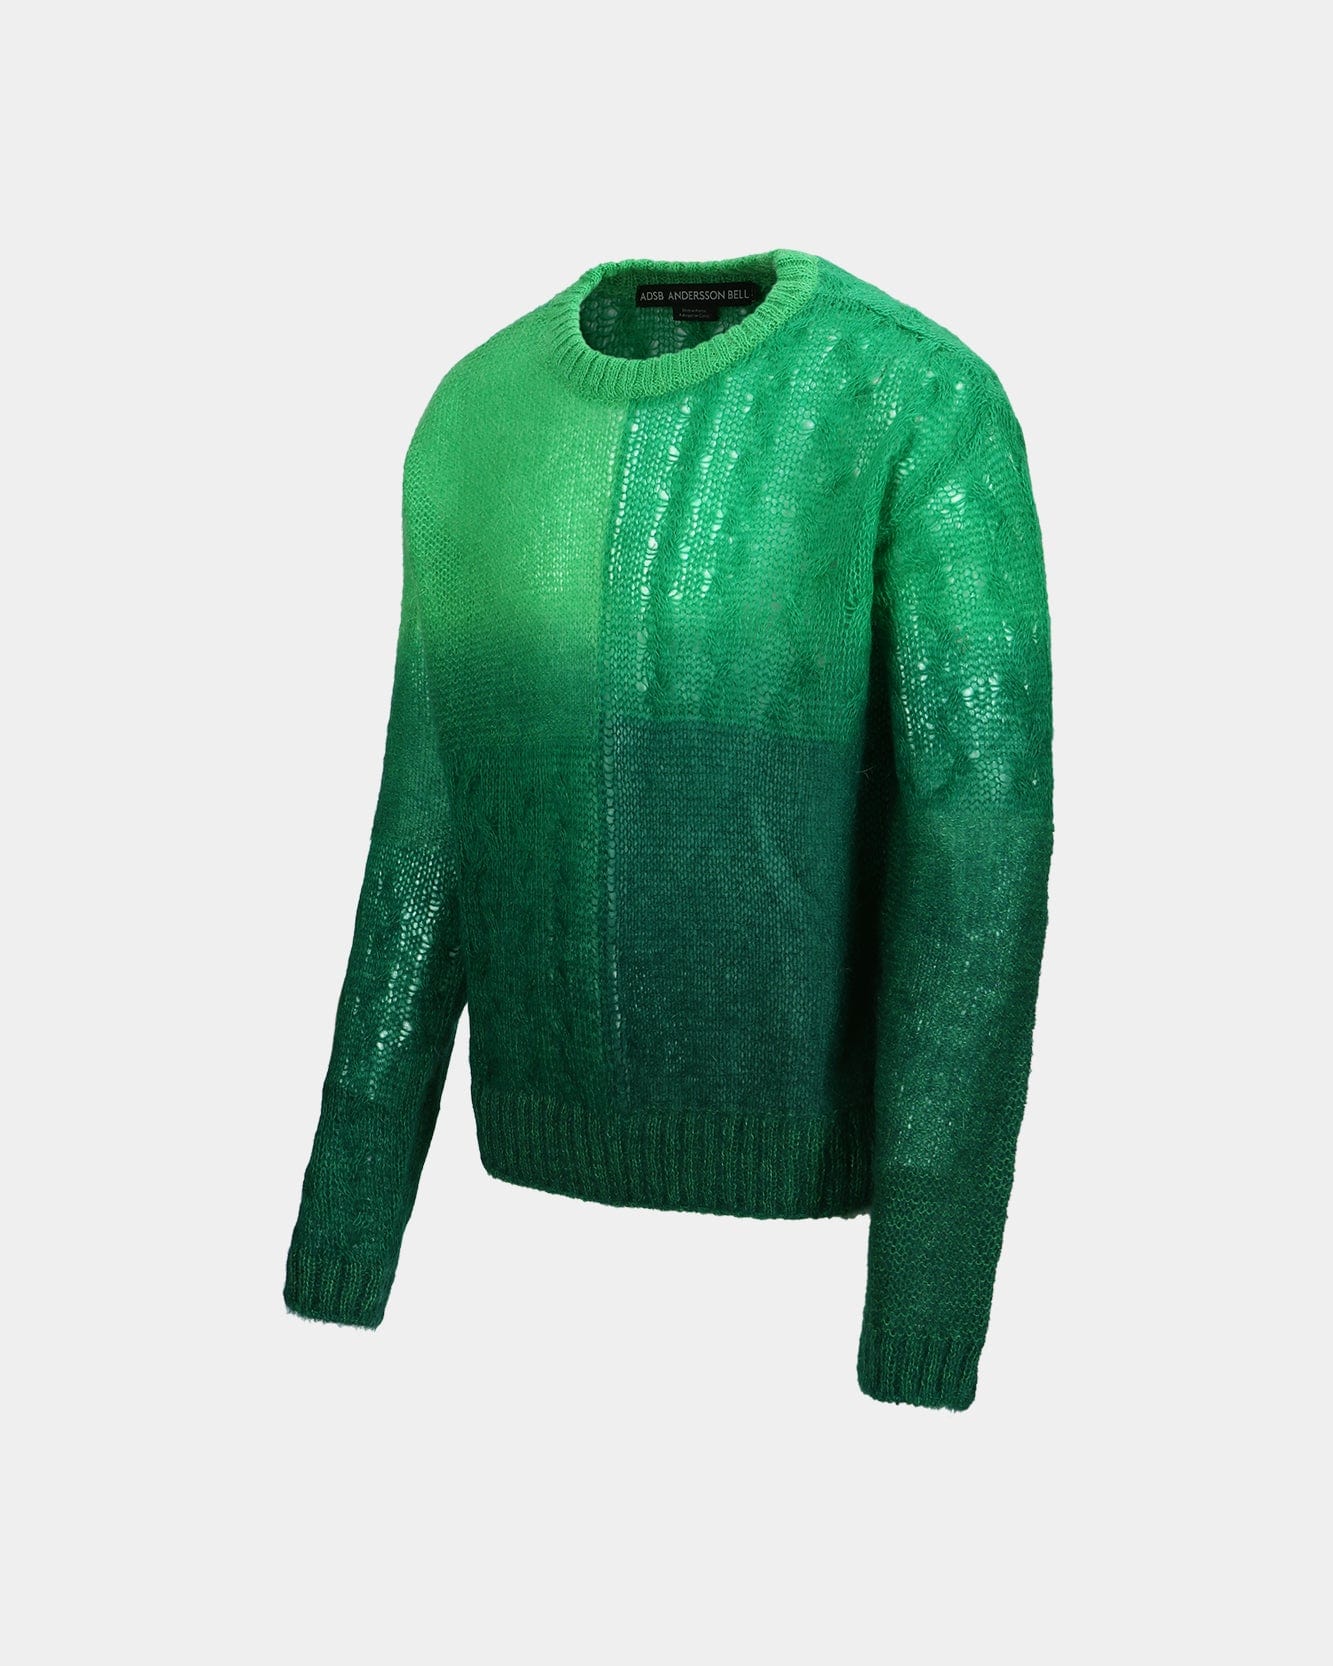 Andersson Bell FORESK MOHAIR CREW-NECK SWEATER atb1067m(GREEN)